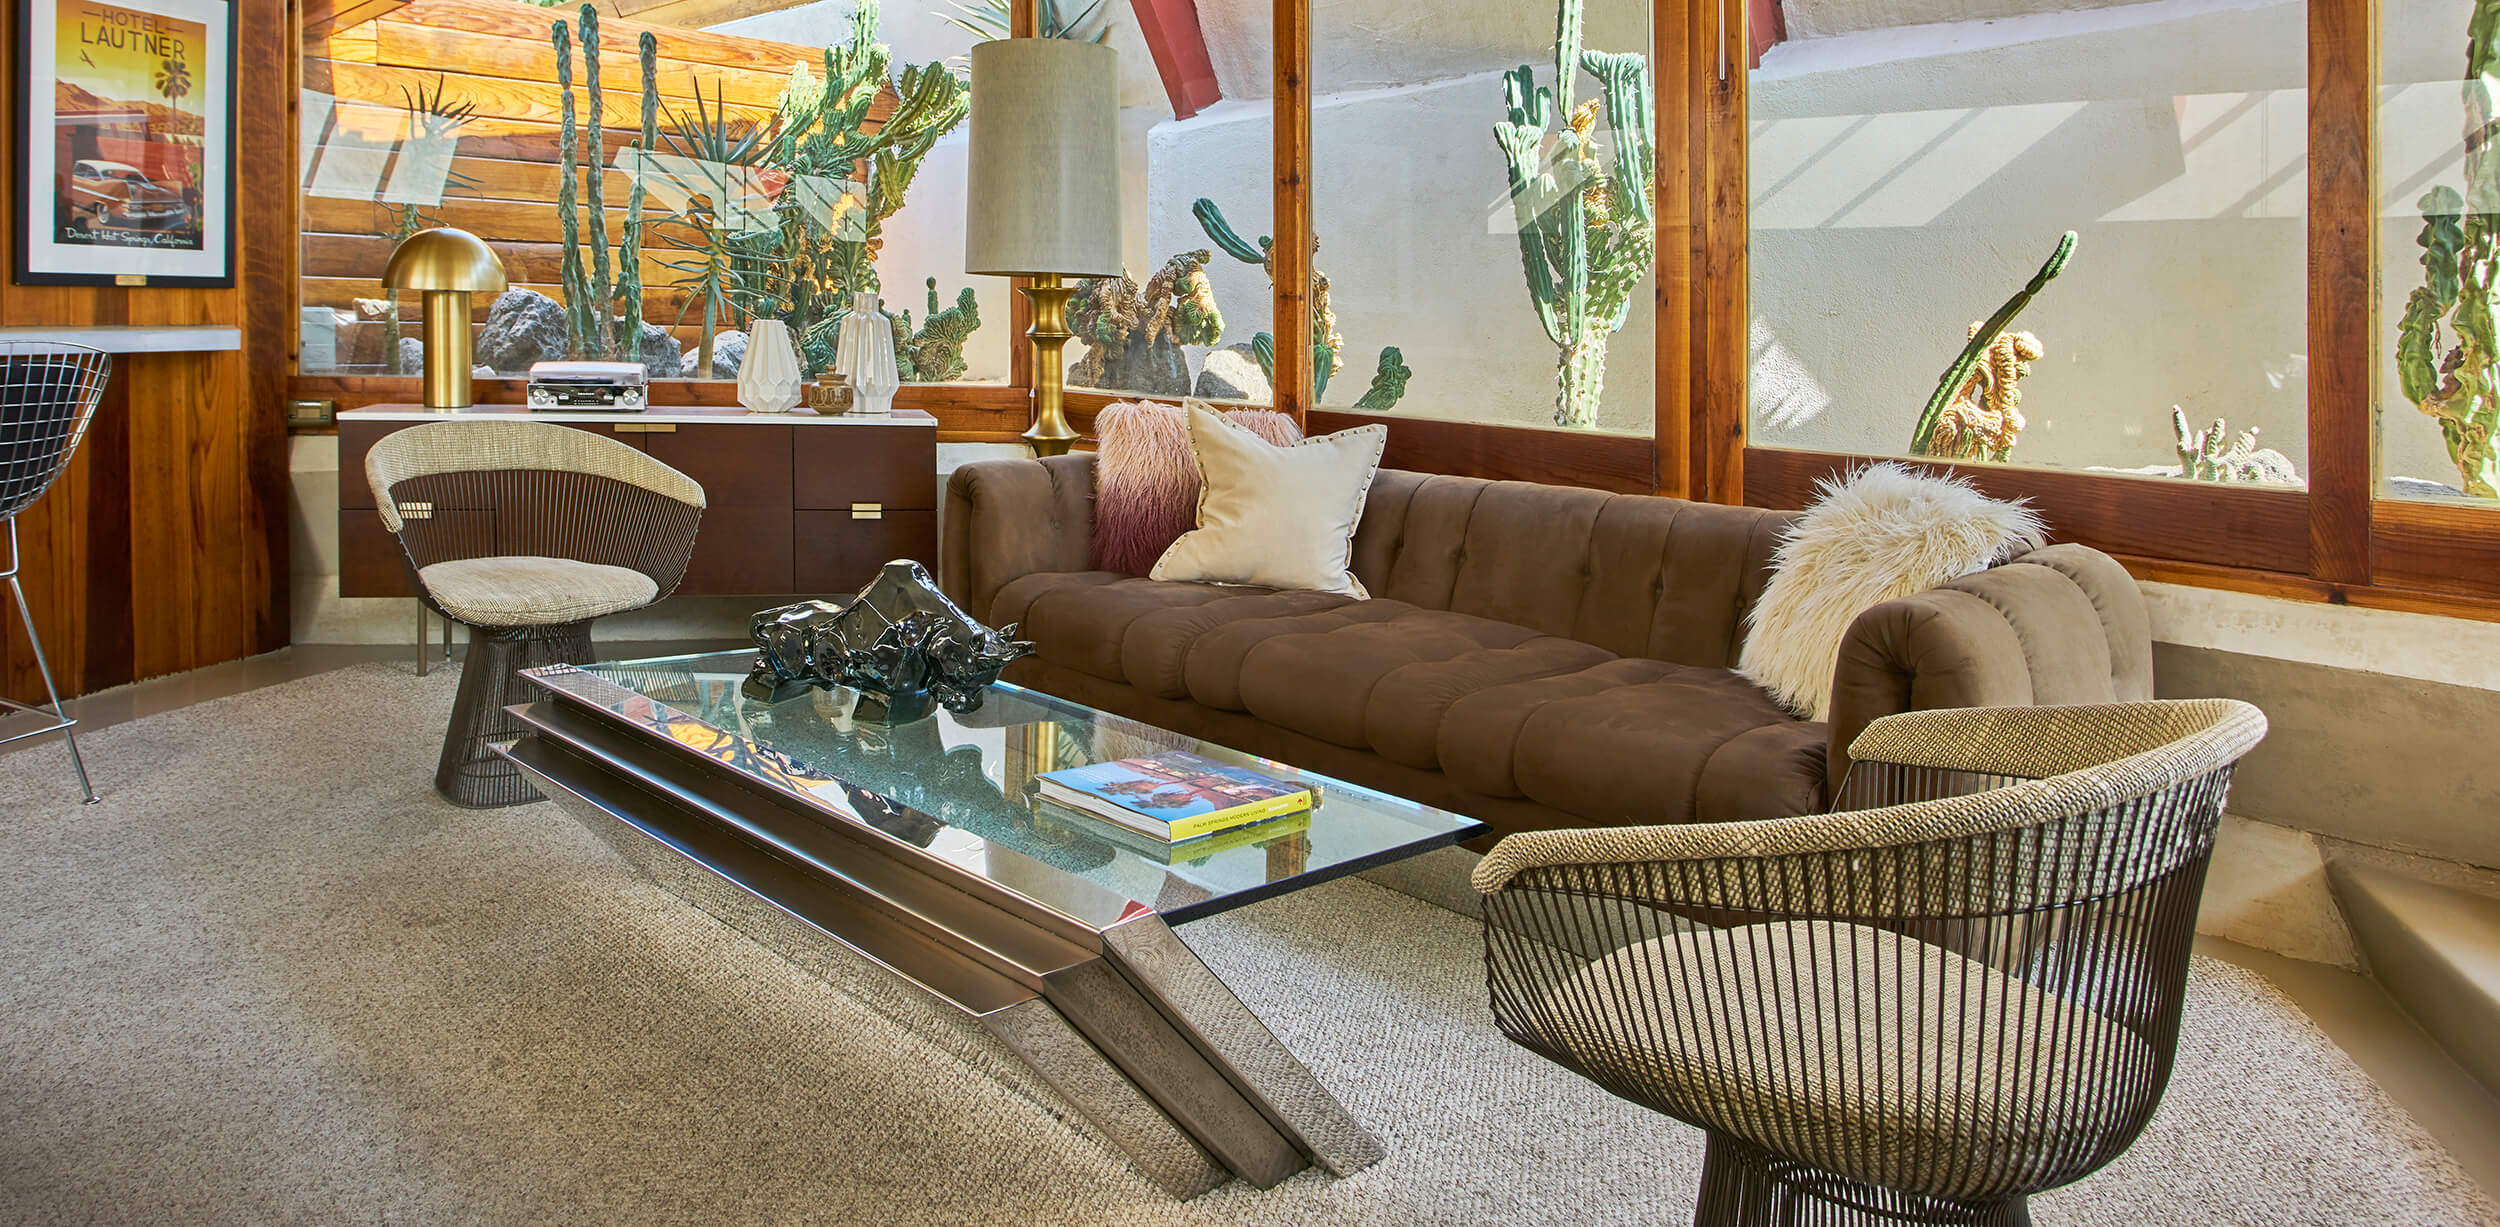 A classic example of Midcentury Modern furniture in a MCM interior design.